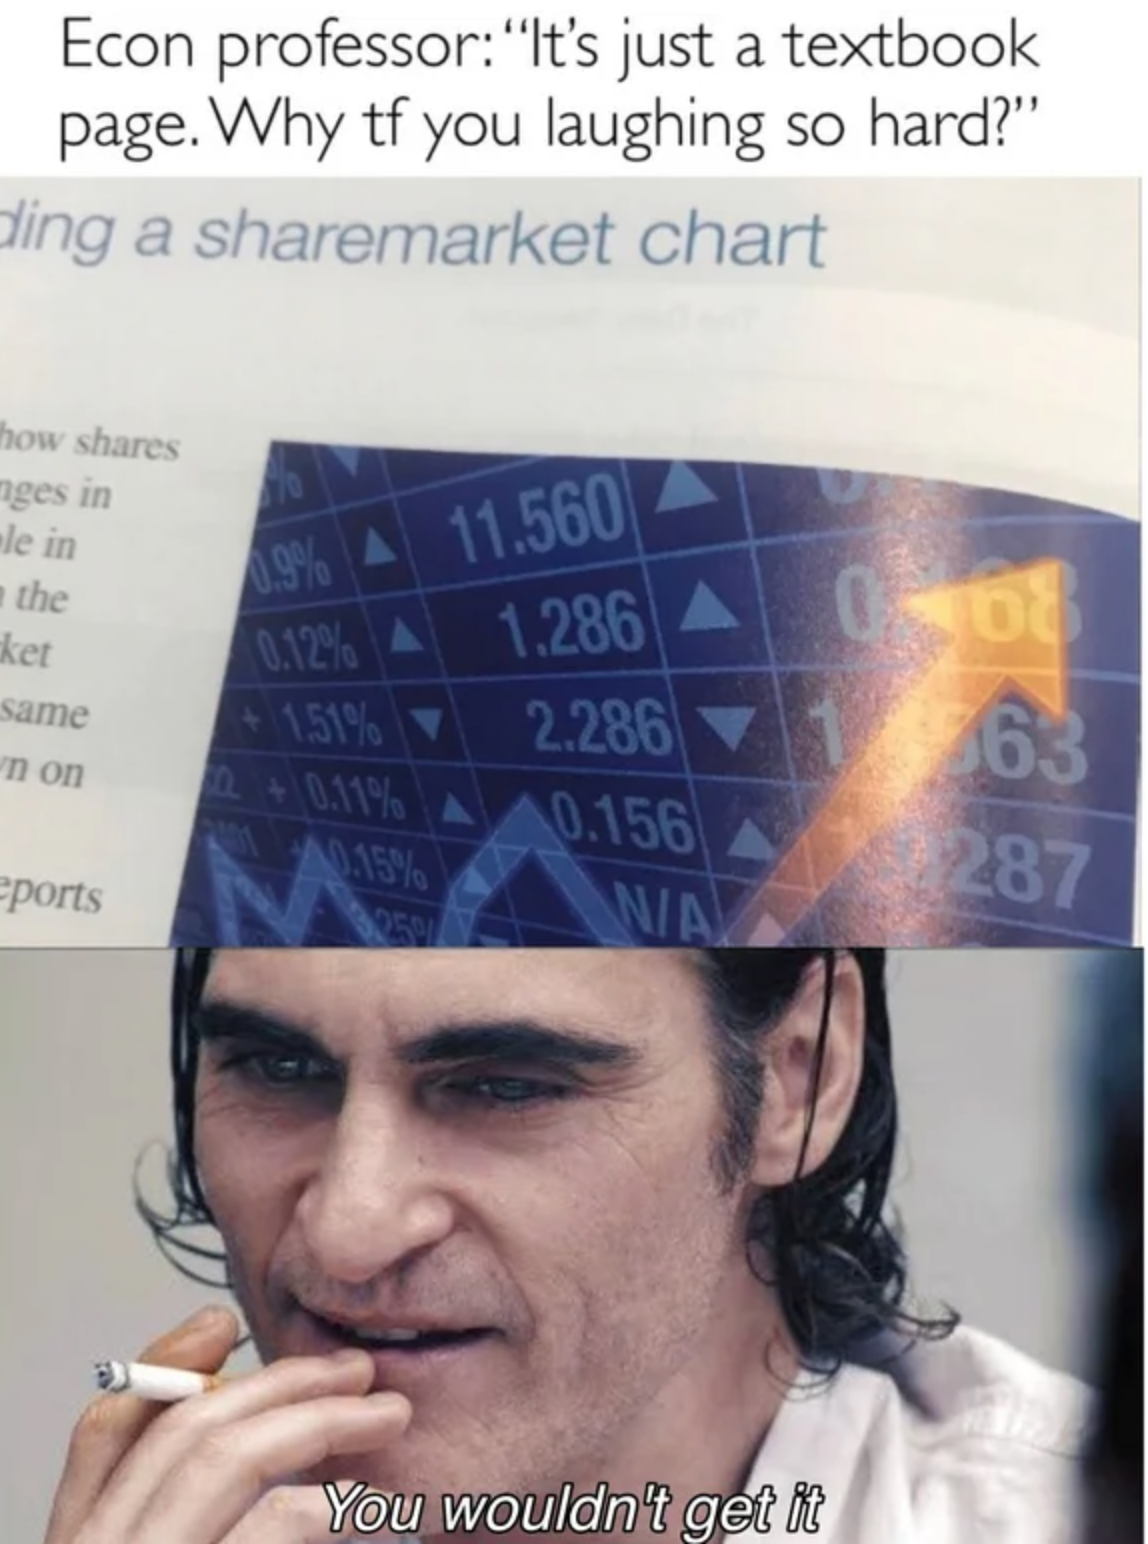 Econ professor It's just a textbook page. Why tf you laughing so hard?" ding a market chart how le in che ker 09% A 11.560 0 0.12% A 1.286 A Same 2.286 1 63 non 0.156 Wia 287 Eports You wouldn't get i